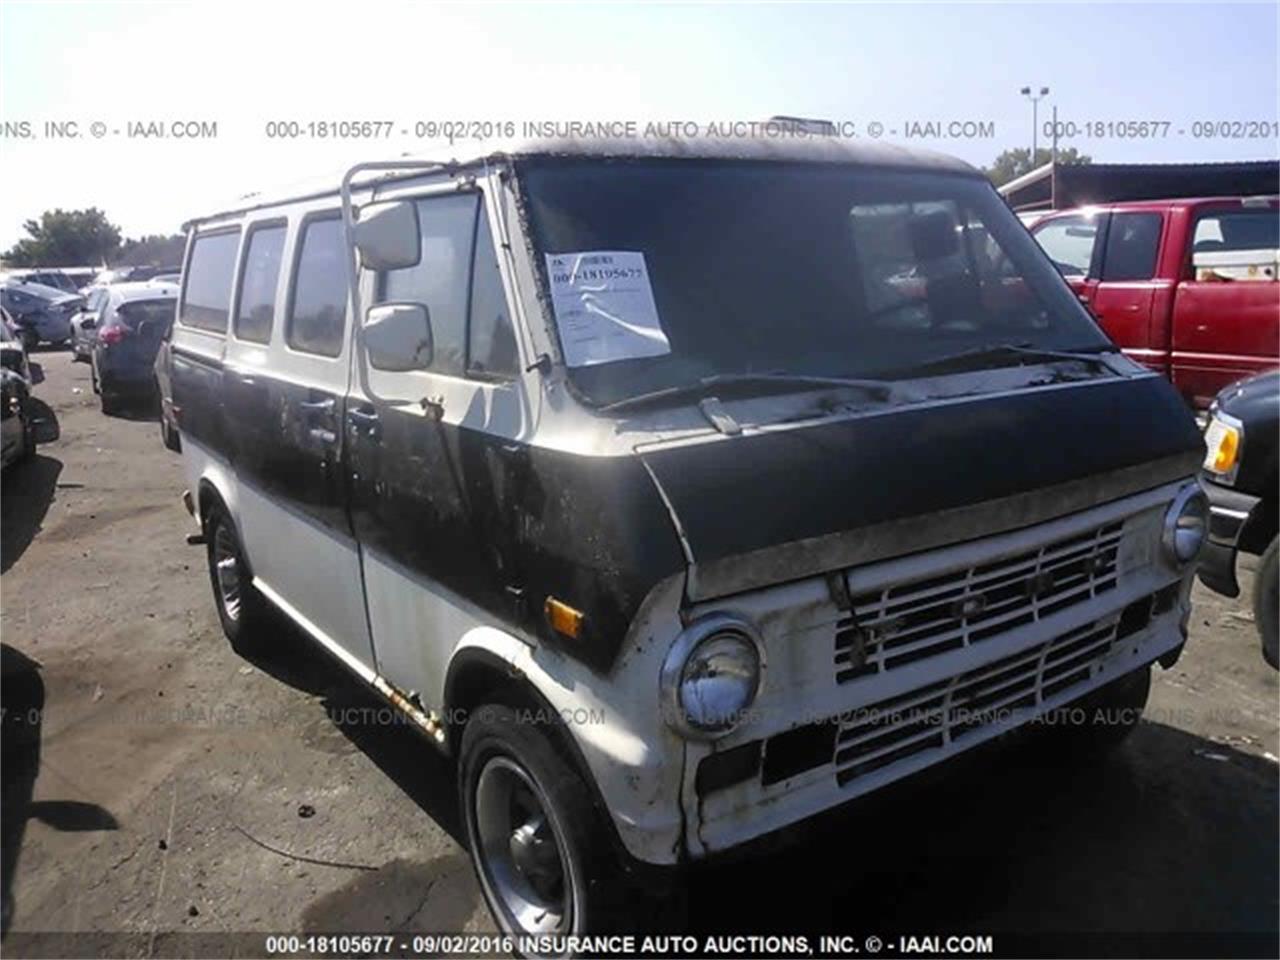 1975 ford van for sale